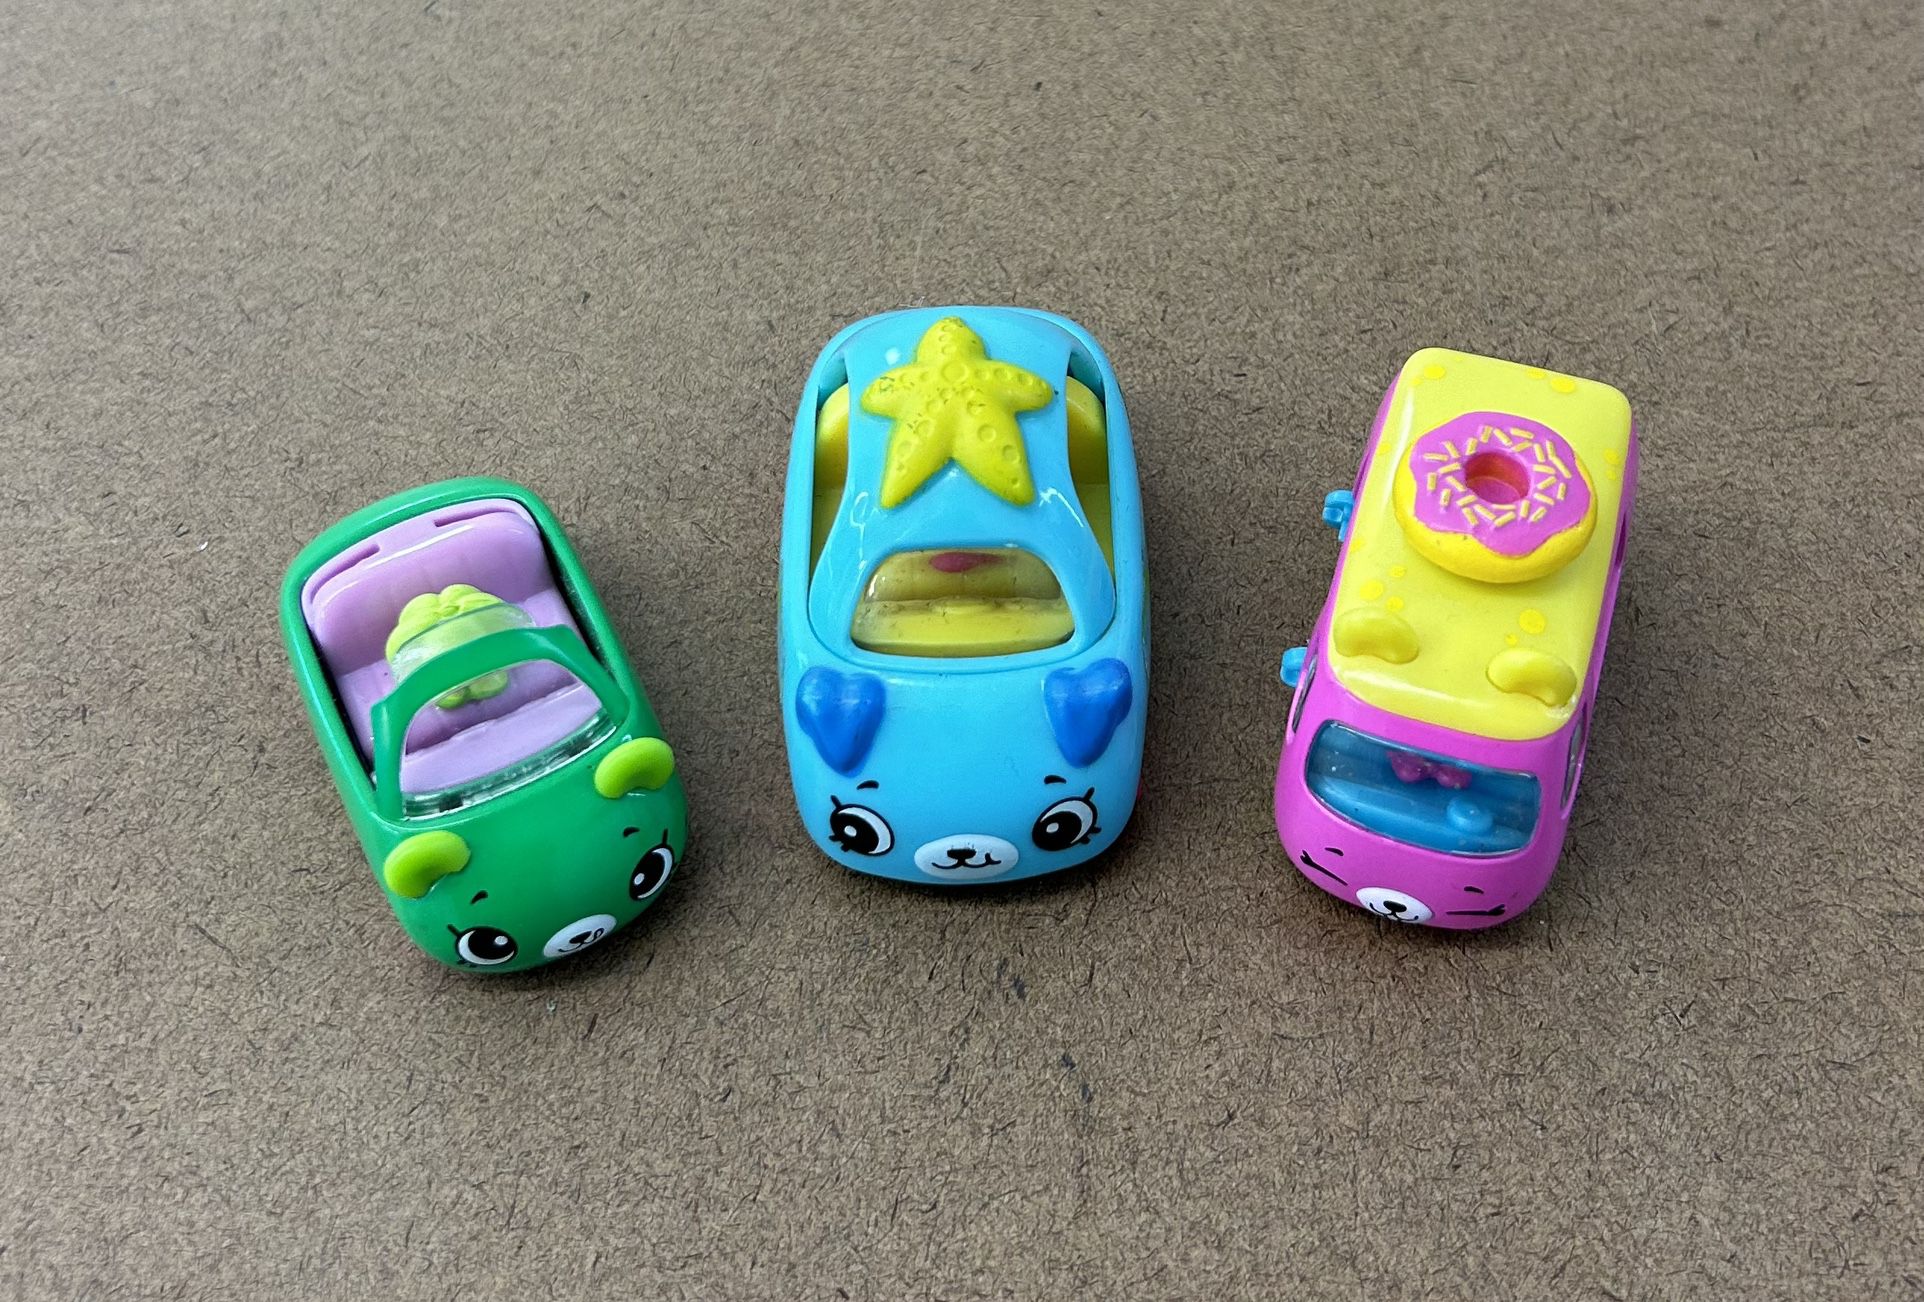 Moose Toys SHOPKINS “Cutie Cars” Lot Of 3 (pre-owned)